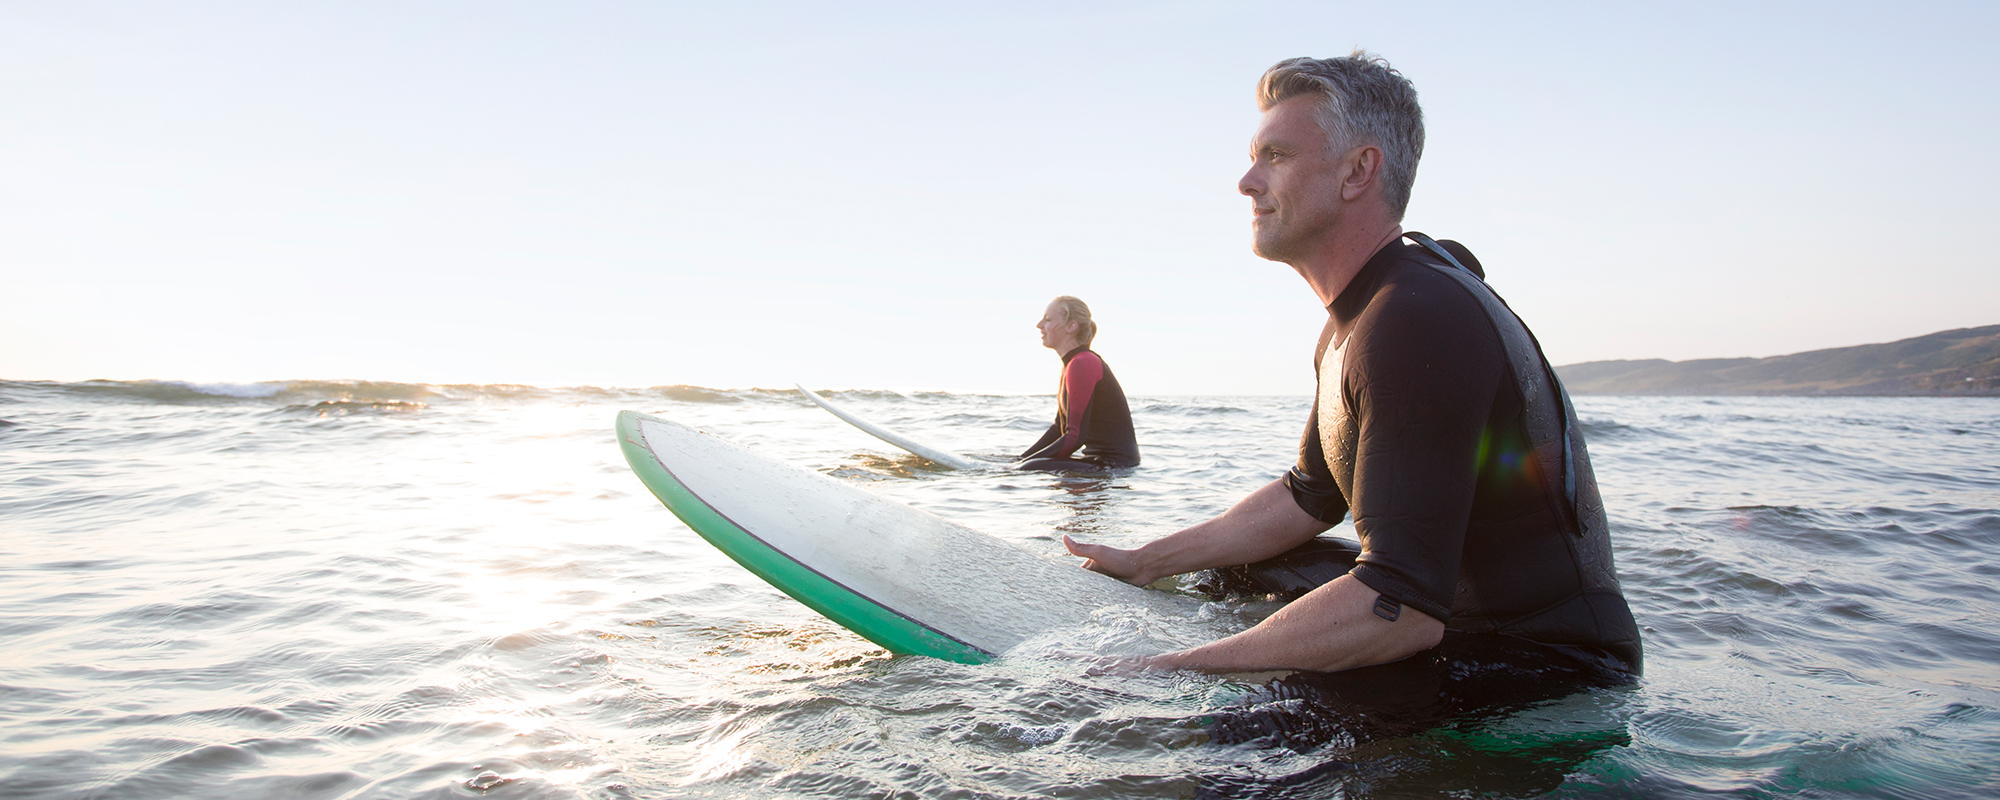 Two people on surfboards